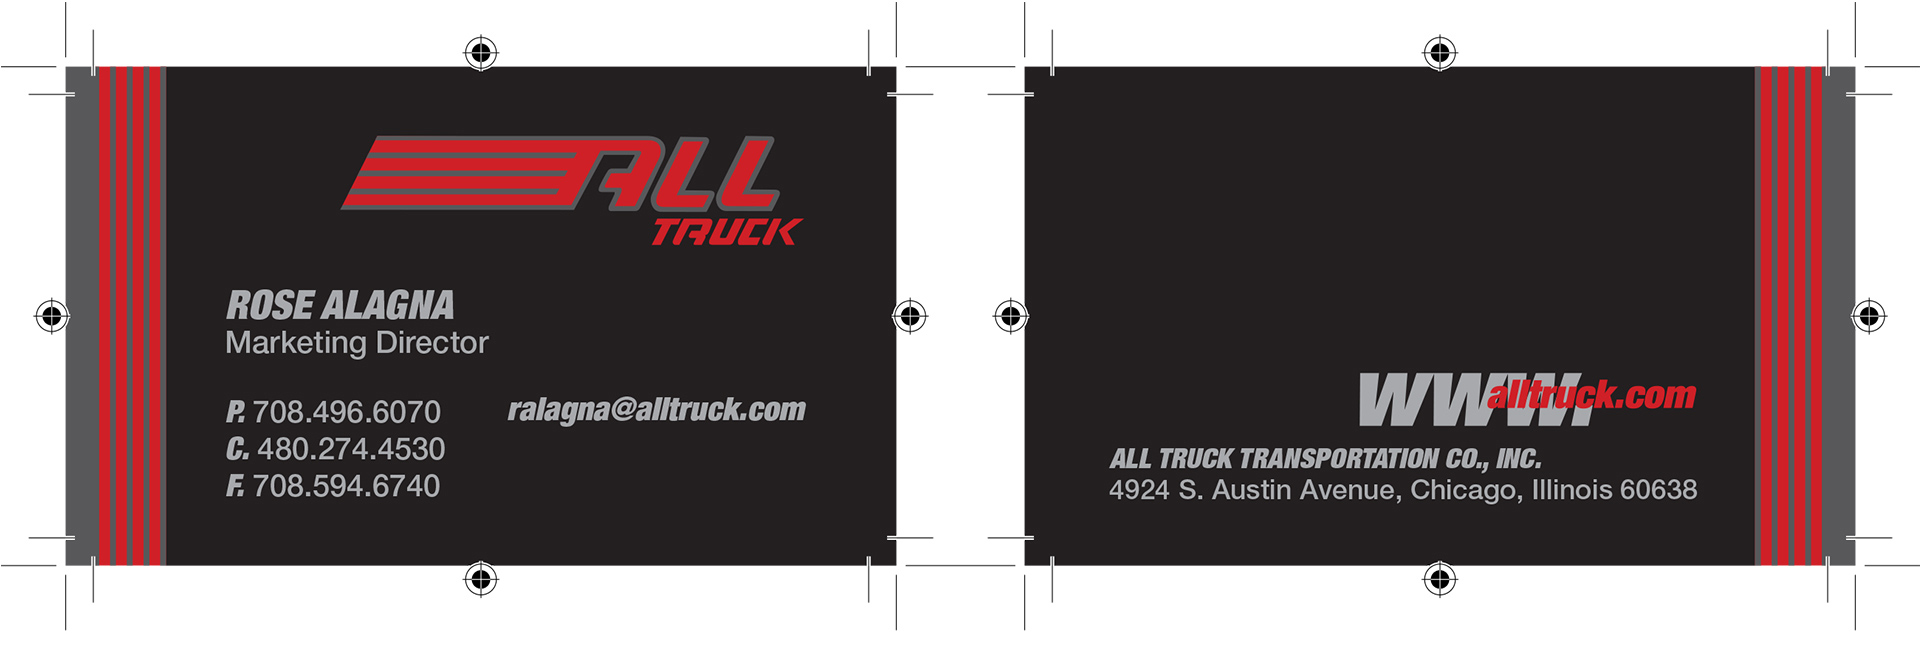 All Truck USA Corporate Identity System